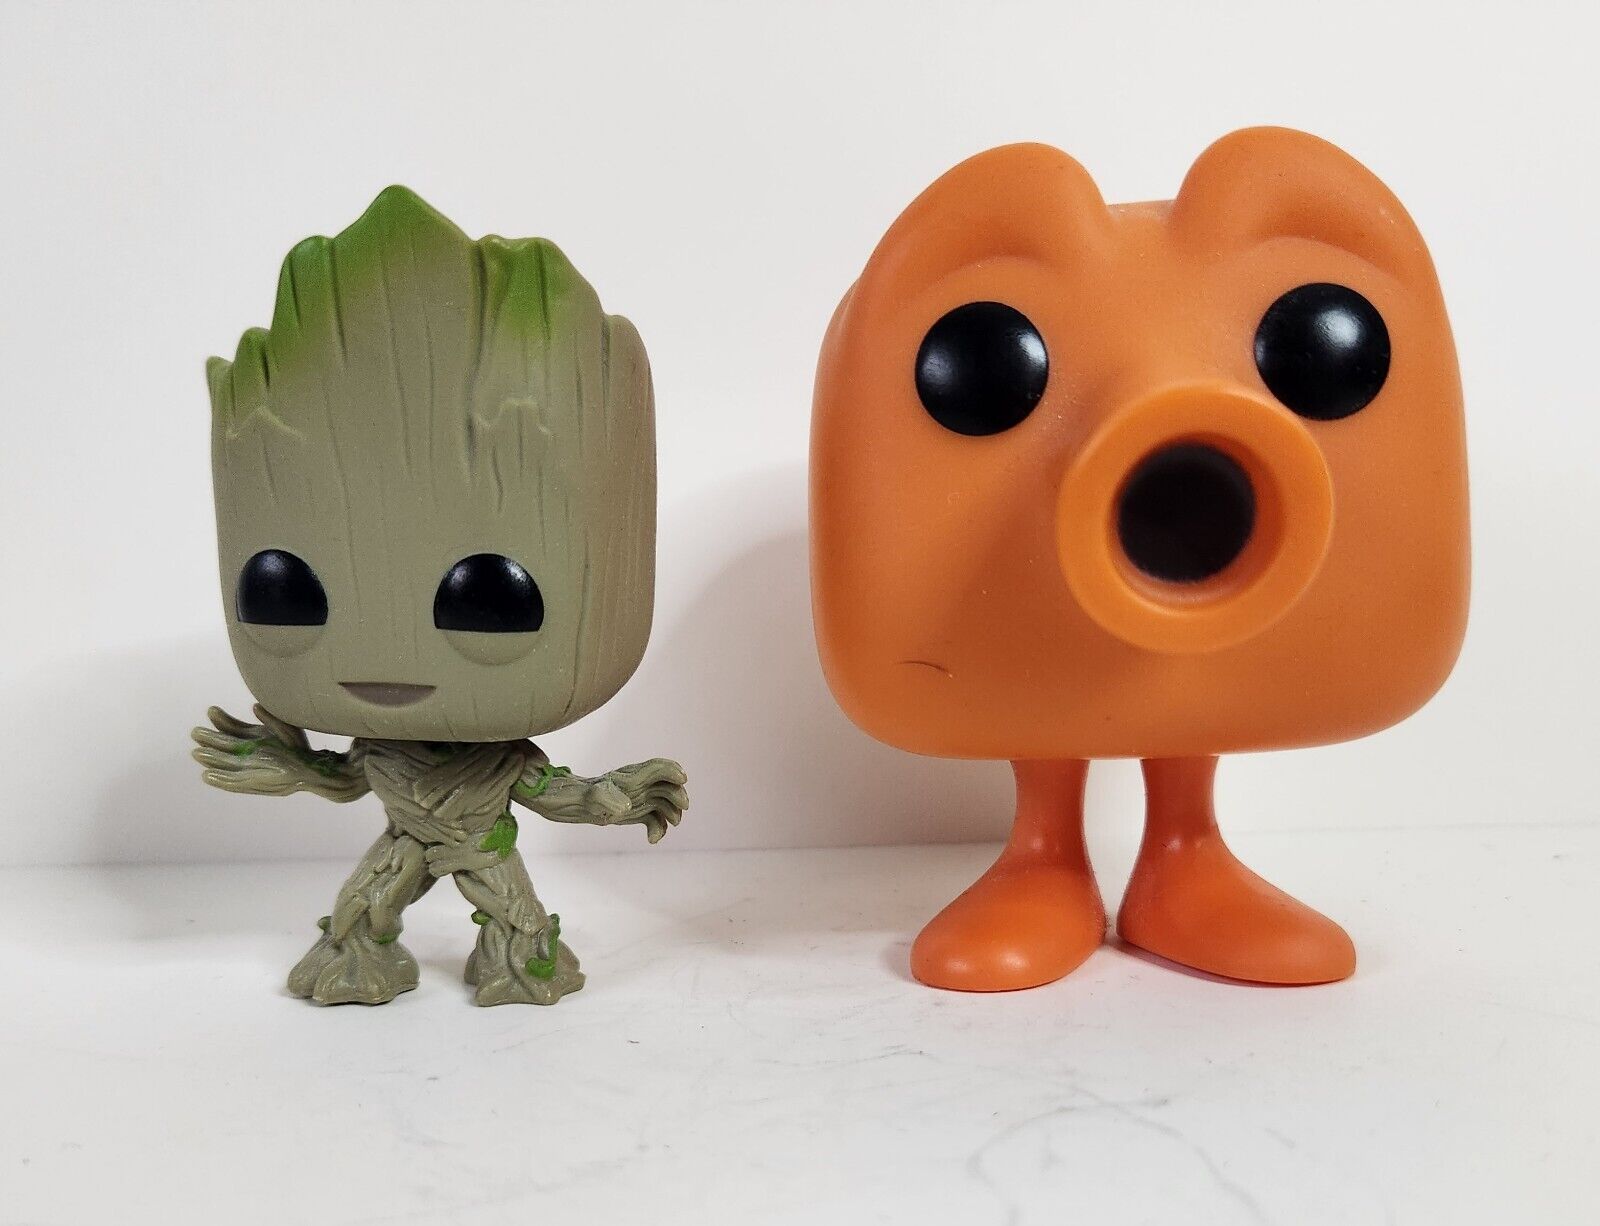 TWO UNBOXED GAMING FUNKO POP FIGURES - #202 GROOT AND #169 Q-BERT